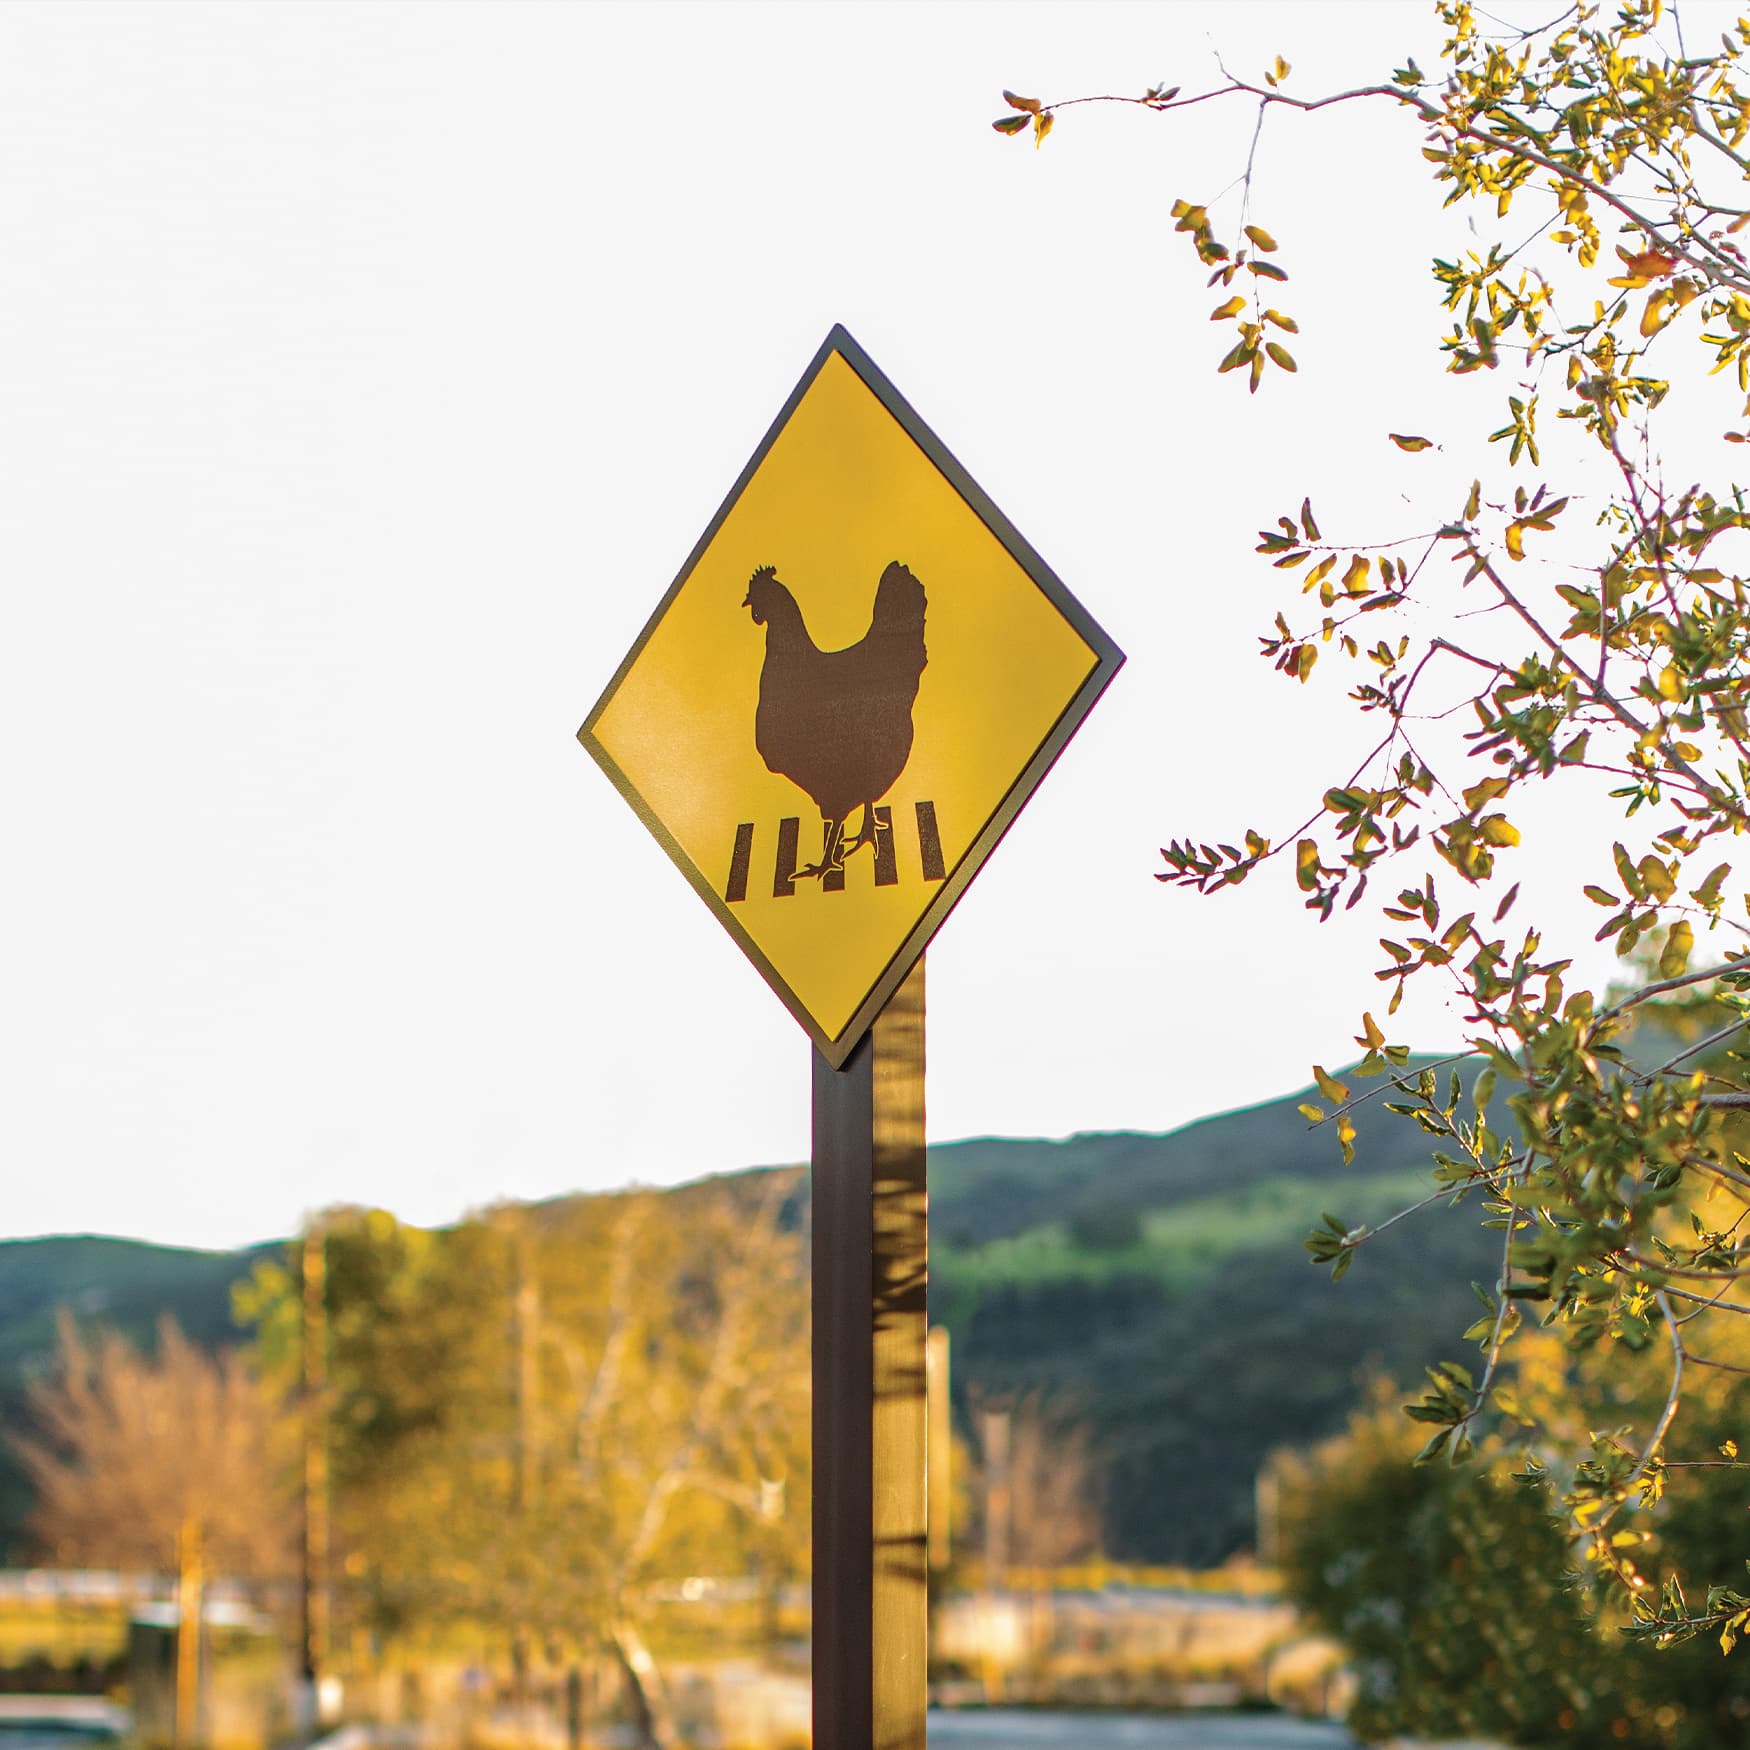 Close up of a chicken crossing illustration sign done by RSM Design for Rancho Mission Viejo. Yellow yield sign at sunset with chicken illustration. 